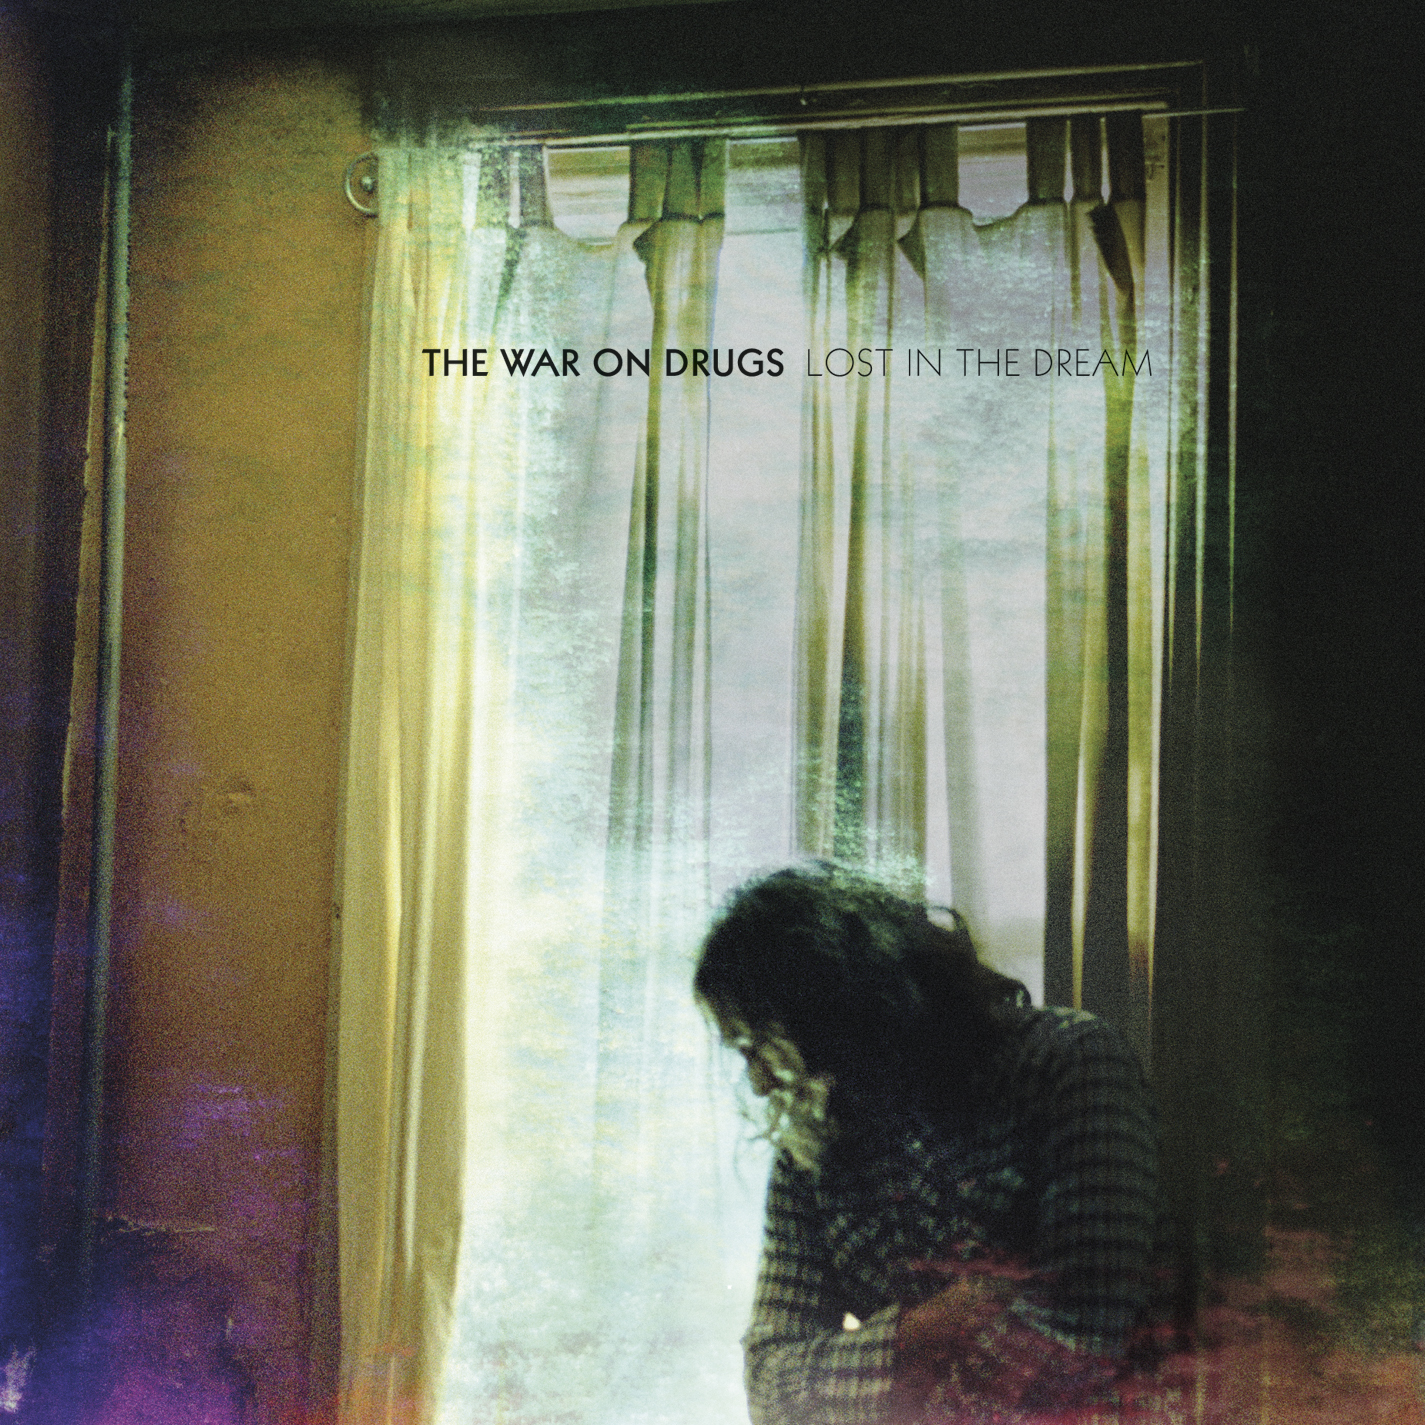 Best Fit’s Album of the Year 2014: Lost in the Dream by The War on Drugs